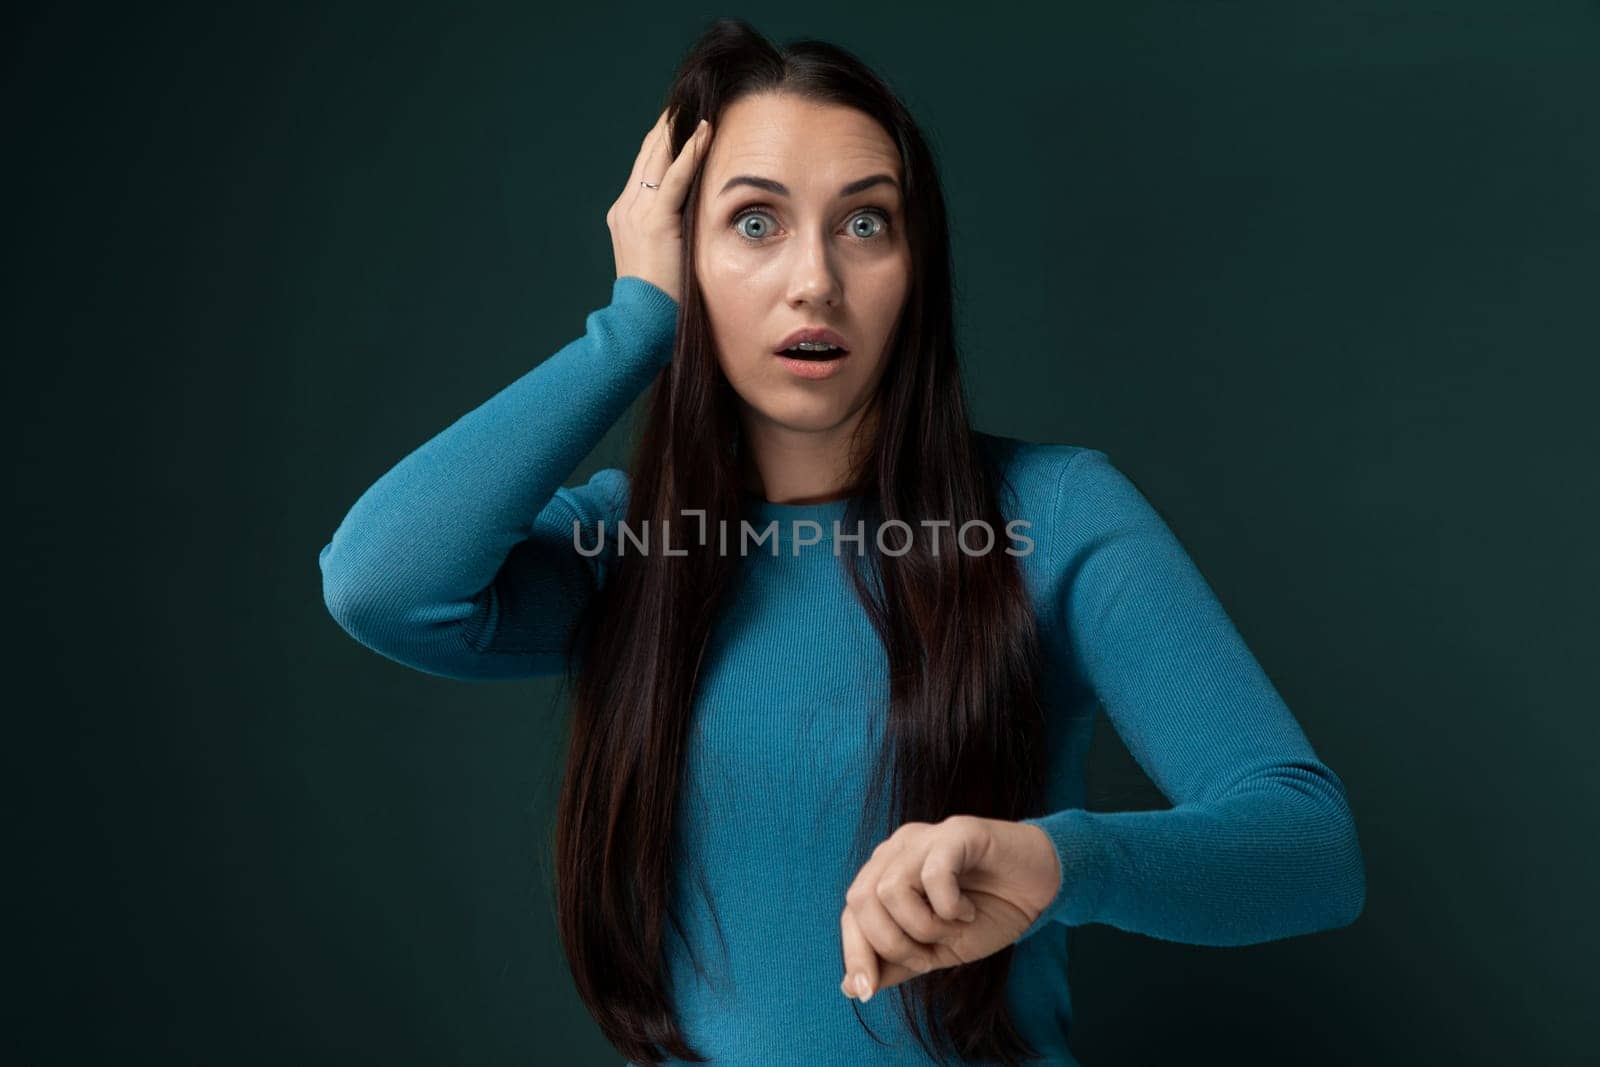 A woman wearing a blue shirt is seen holding her head in this candid shot. She appears distressed or in deep thought, possibly dealing with stress or a headache.